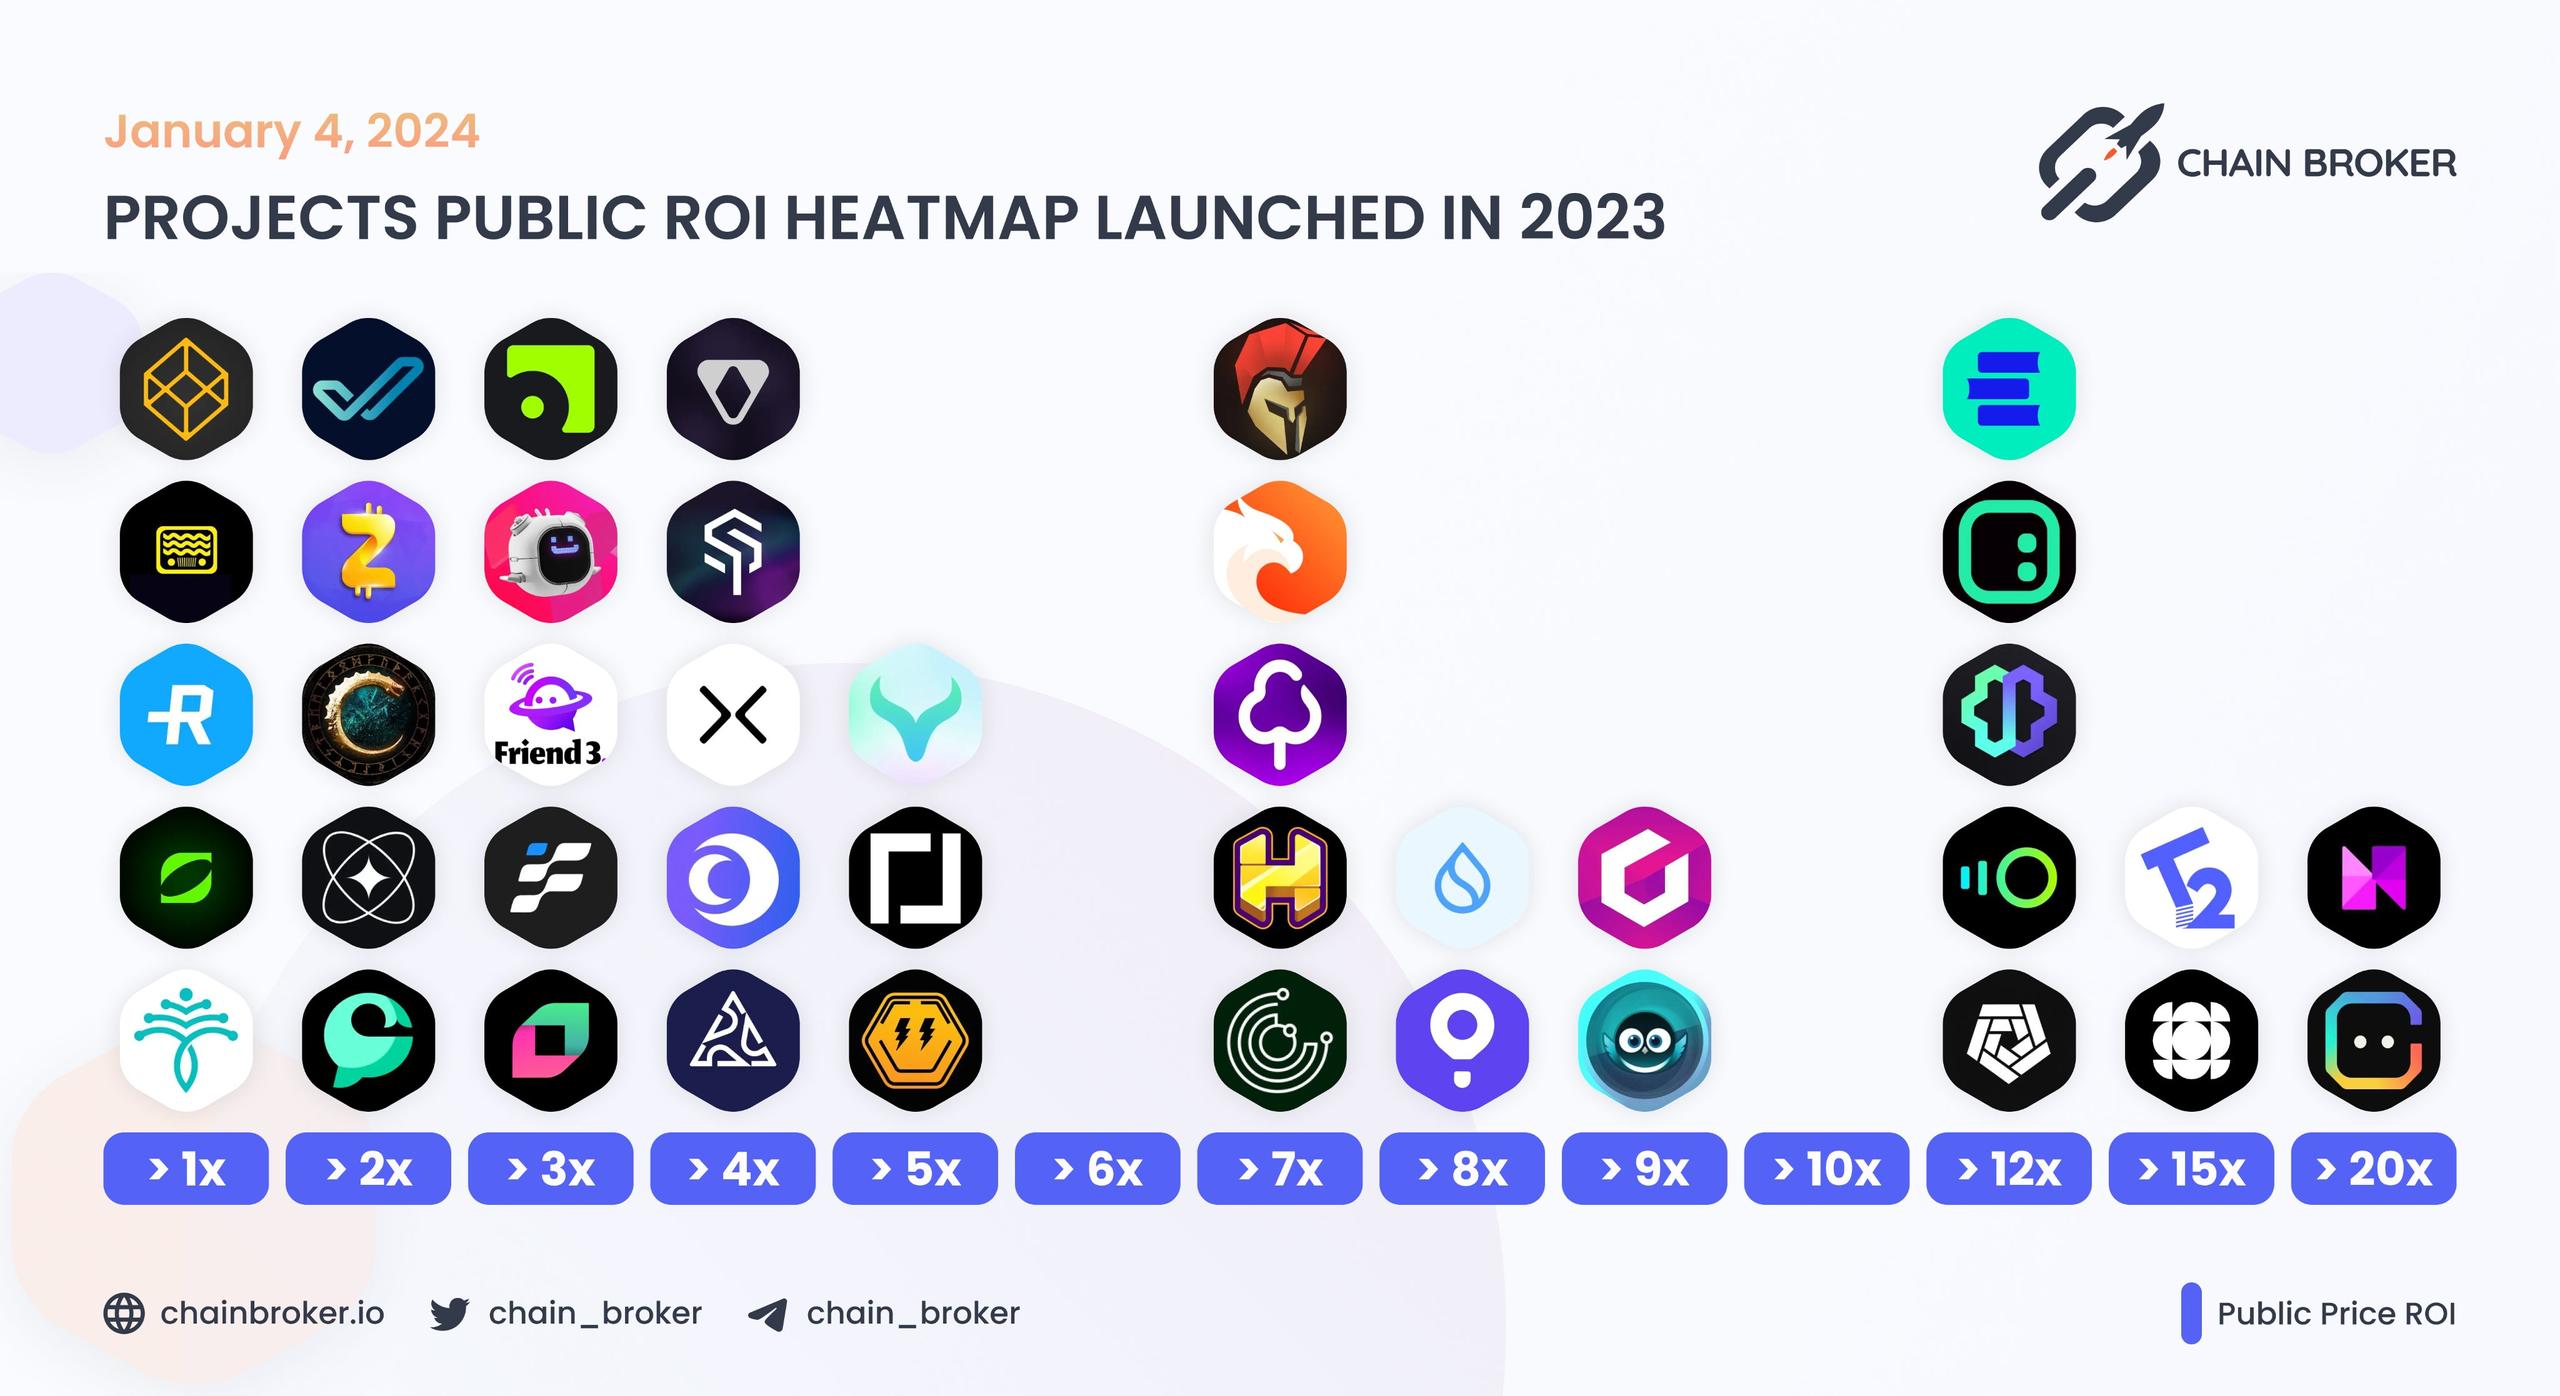 Projects public ROI heatmap launched in 2023